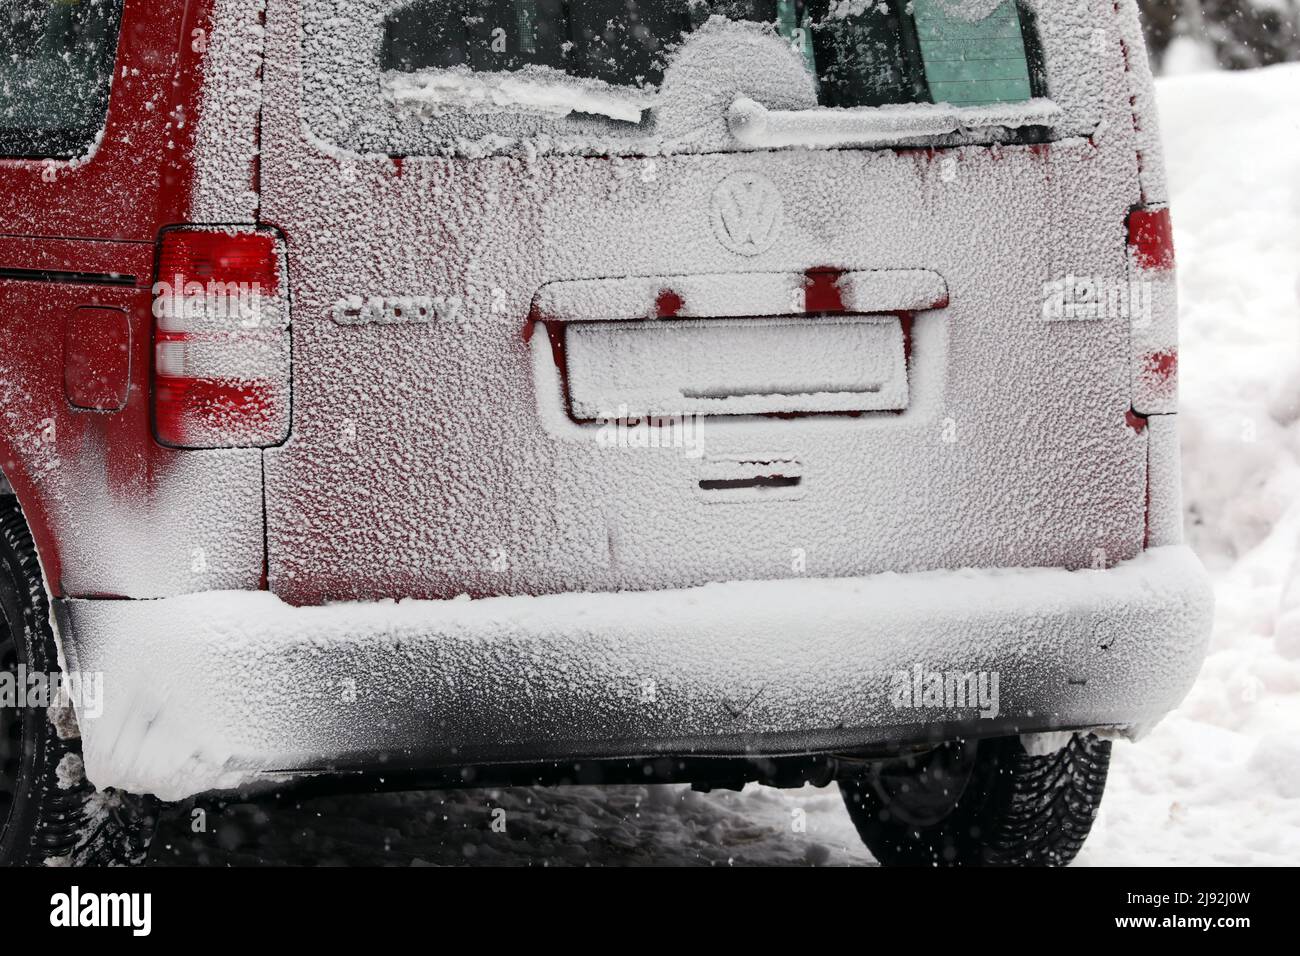 11.02.2021, Kretscham-Rothensehma, Saxony, Germany - Rear of a car is covered with snow. 00S210211D536CAROEX.JPG [MODEL RELEASE: NO, PROPERTY RELEASE: Stock Photo